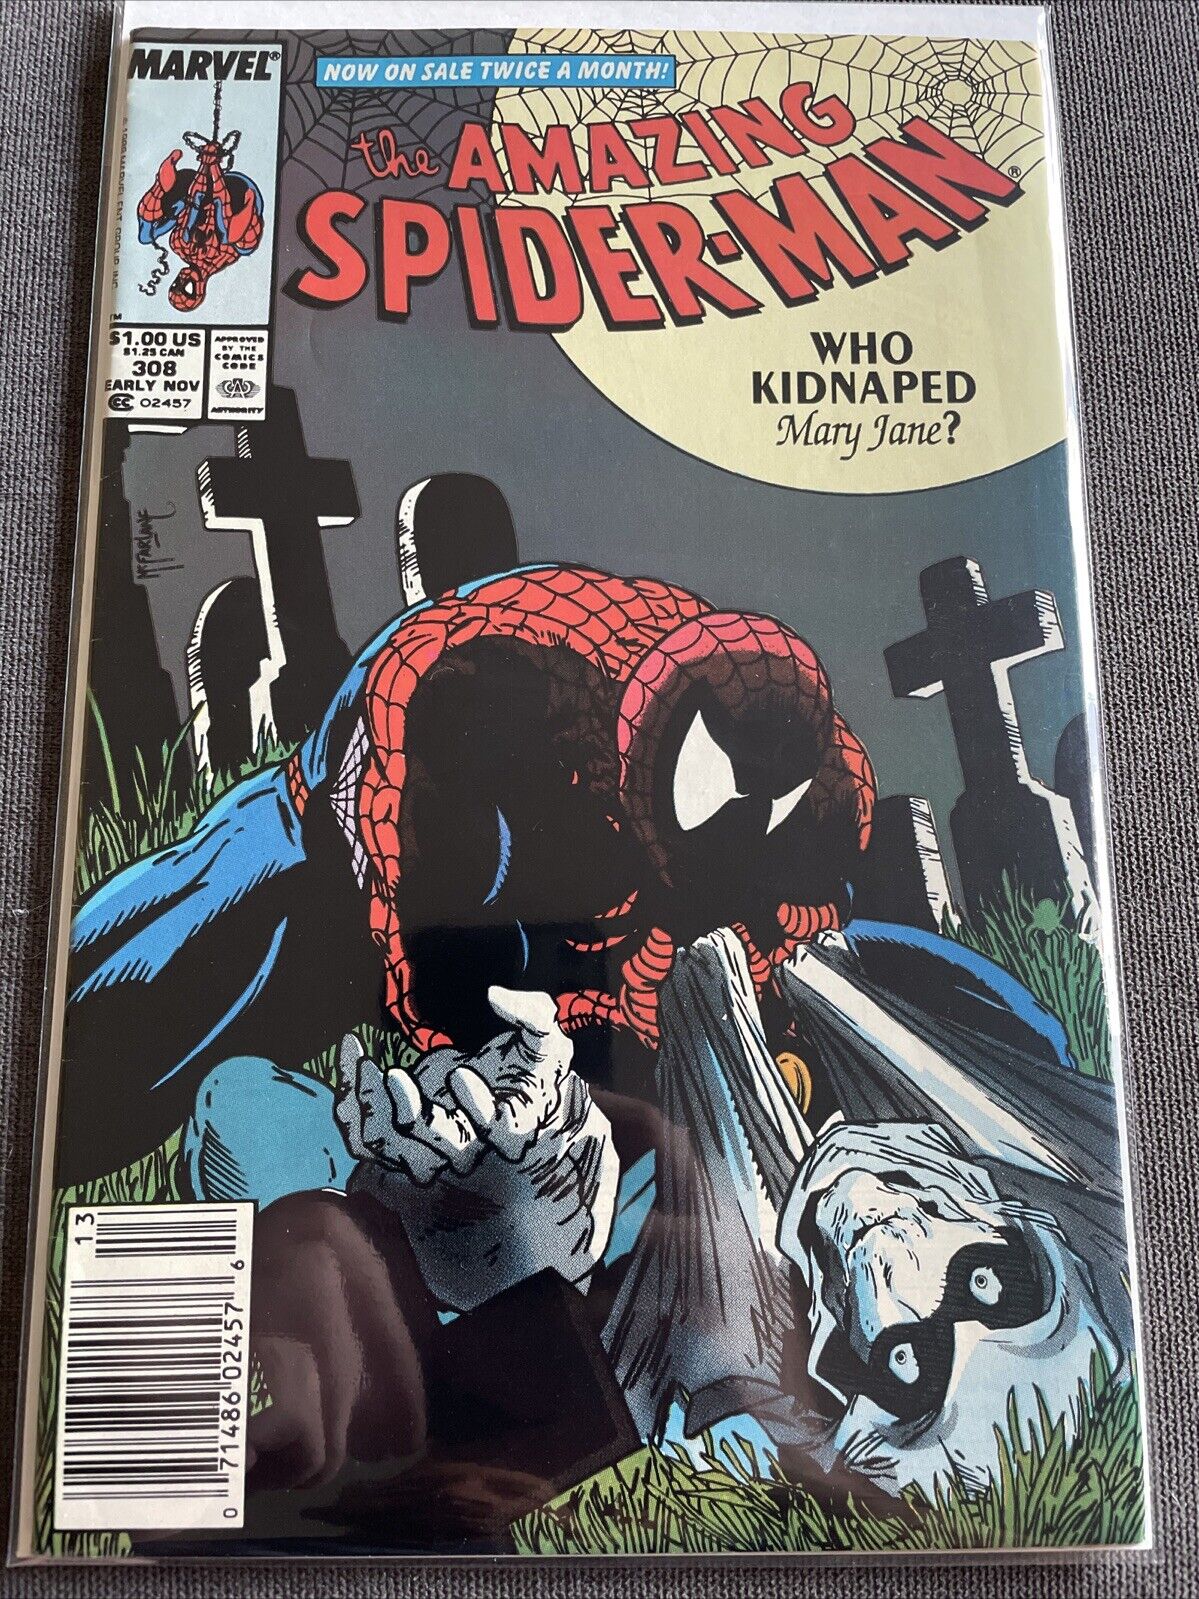 Marvel - THE AMAZING SPIDER-MAN #308 (Great Condition) bagged and boarded